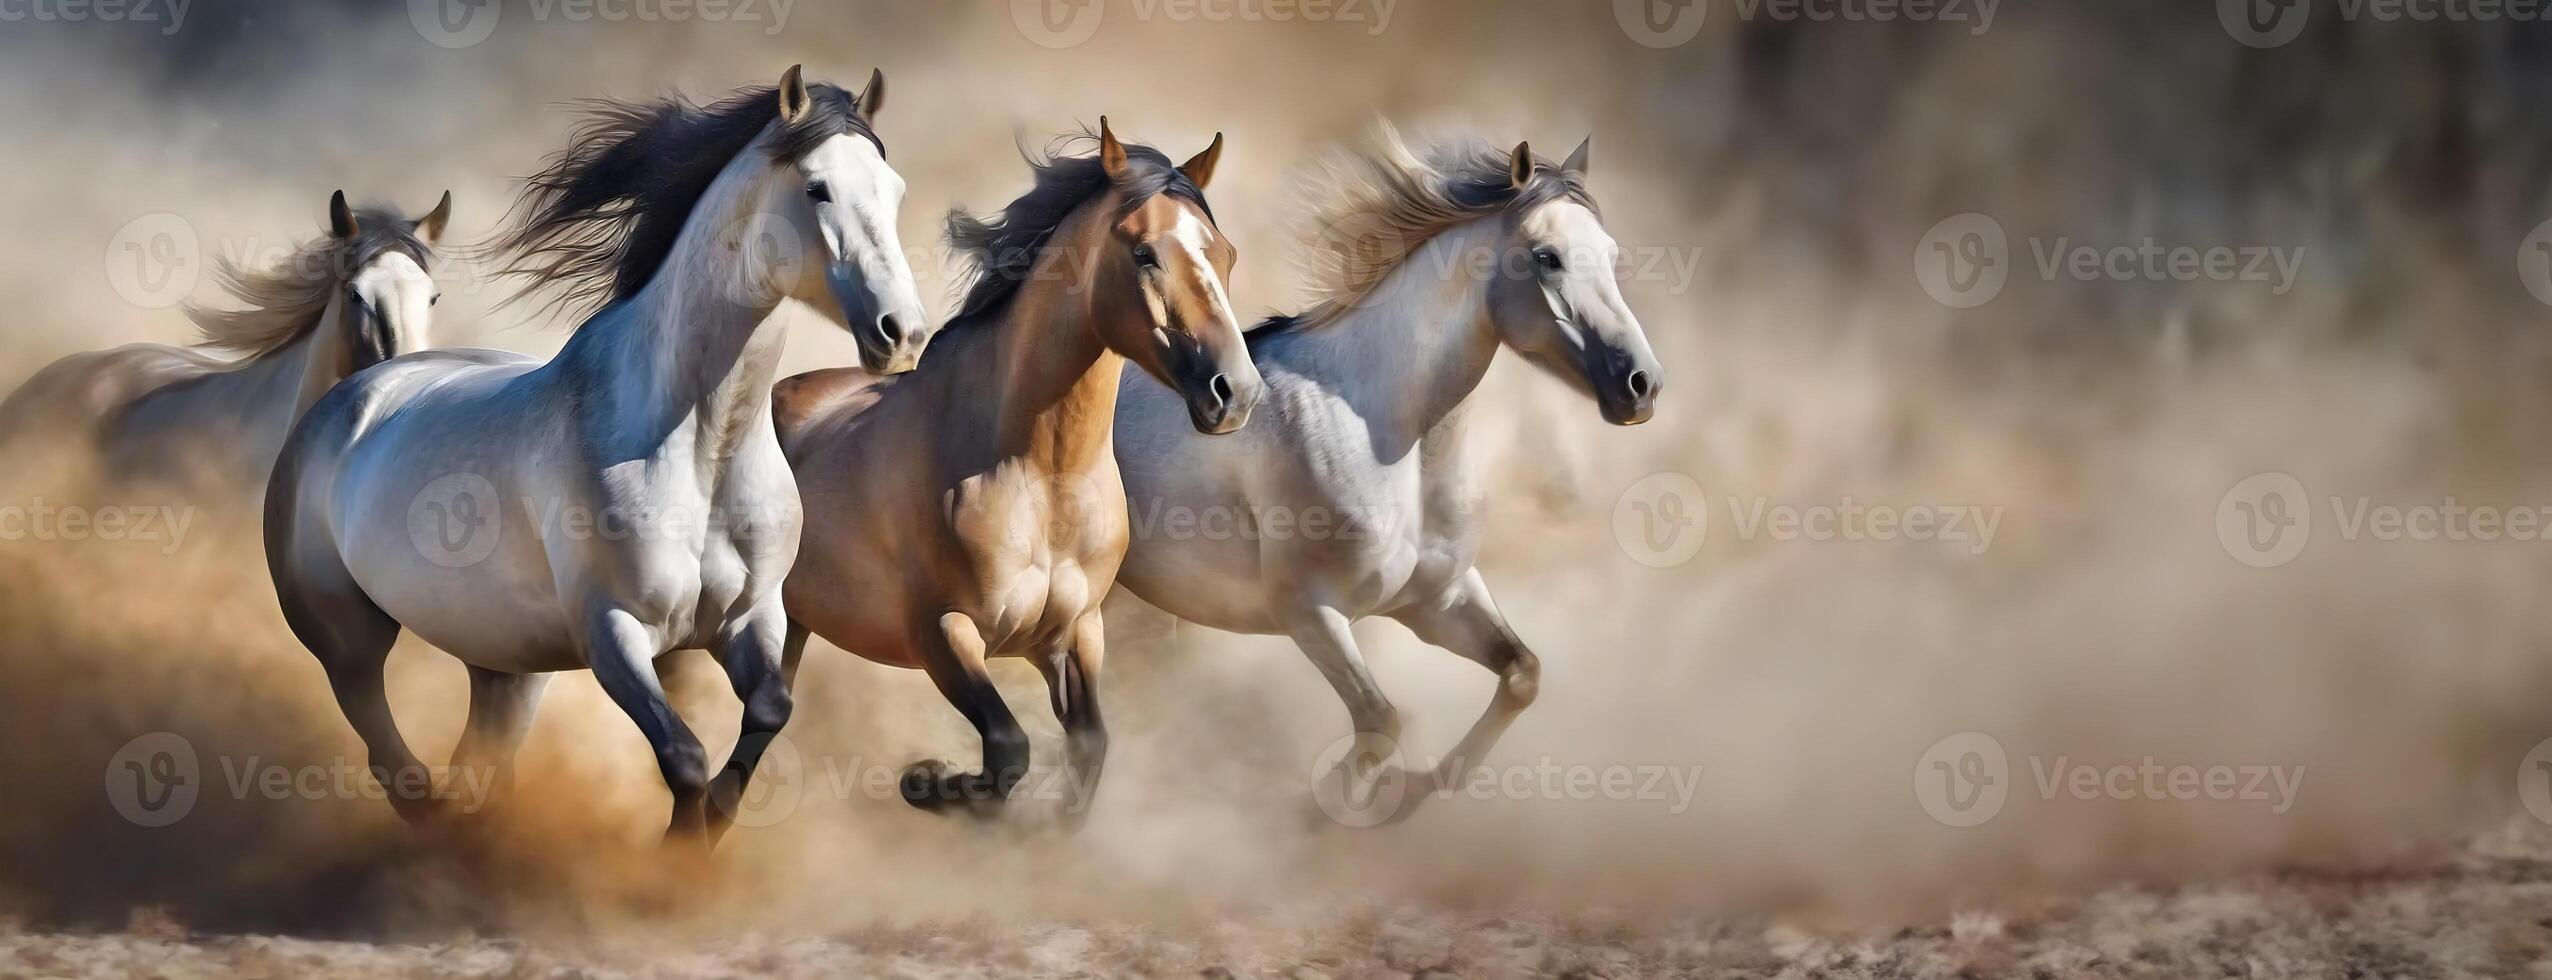 AI Generated Herd of Horses Galloping Through Dusty Trail. A dynamic scene with several horses in mid-gallop, dust rising beneath them, speed, power and freedom concept. Panorama with copy space. photo